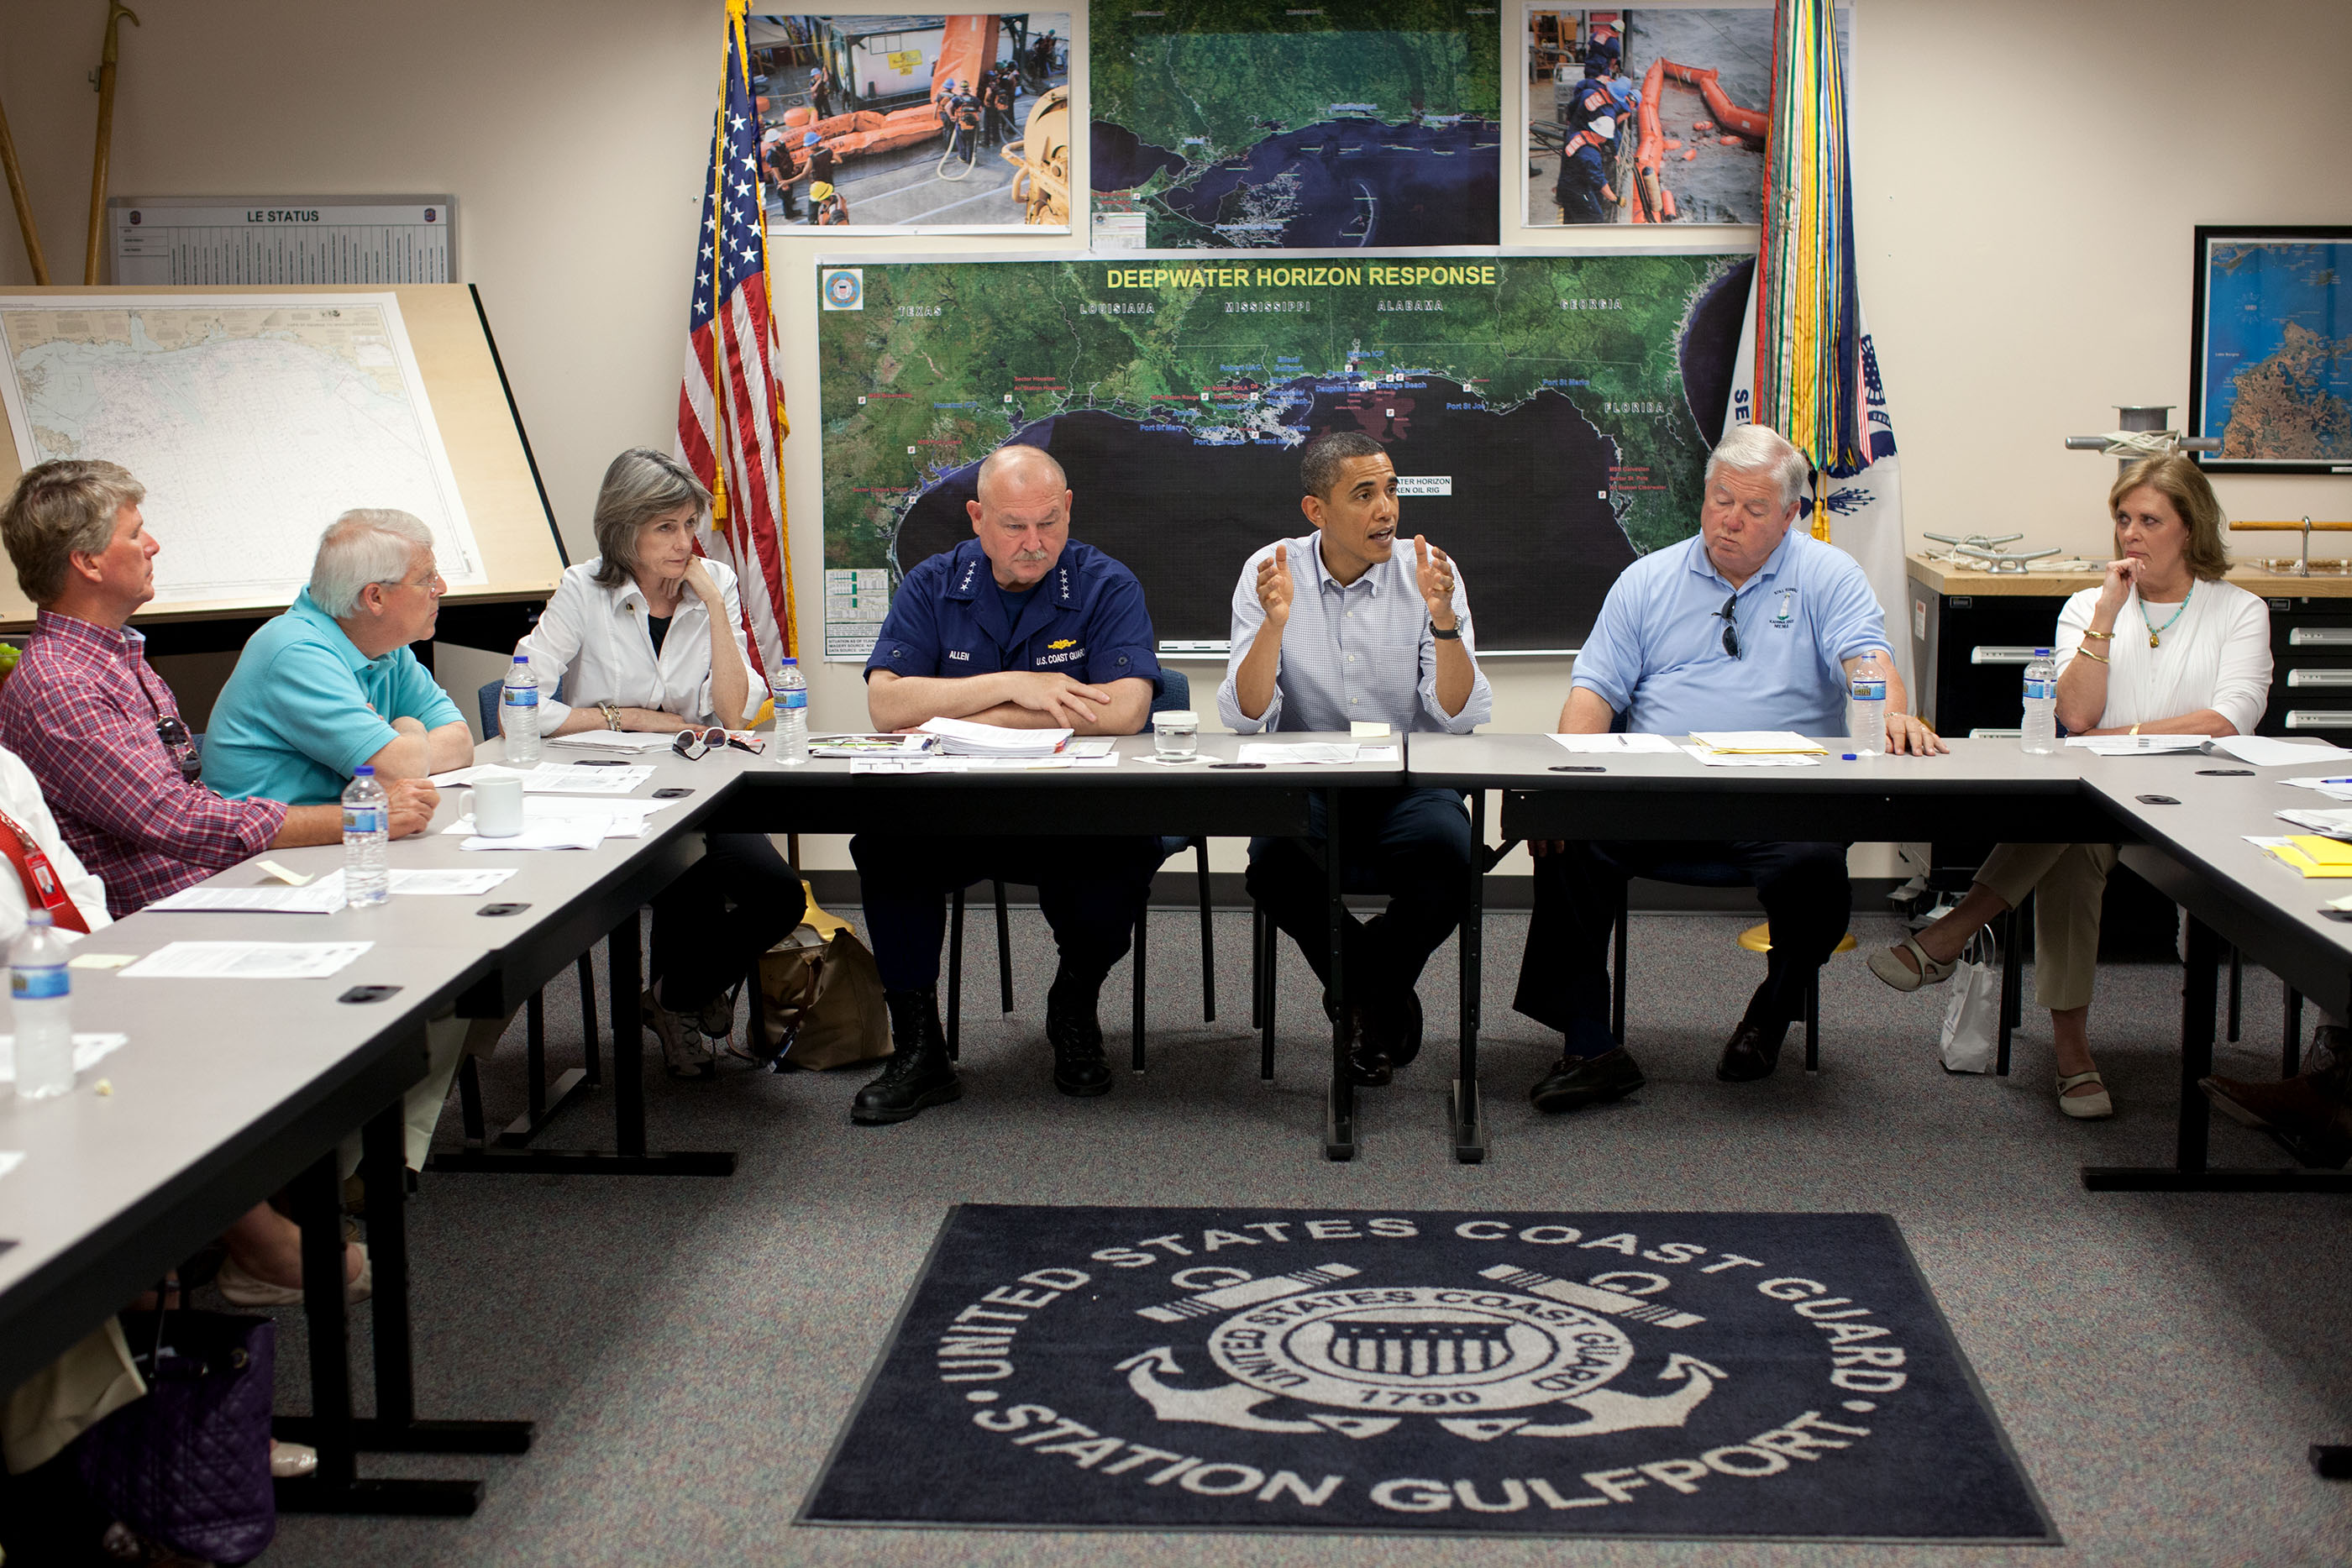 Mississippi, June 14, 2010. Meeting on the BP oil spill in the Gulf of Mexico, at the Gulfport Coast Guard Station. (Official White House Photo by Pete Souza)